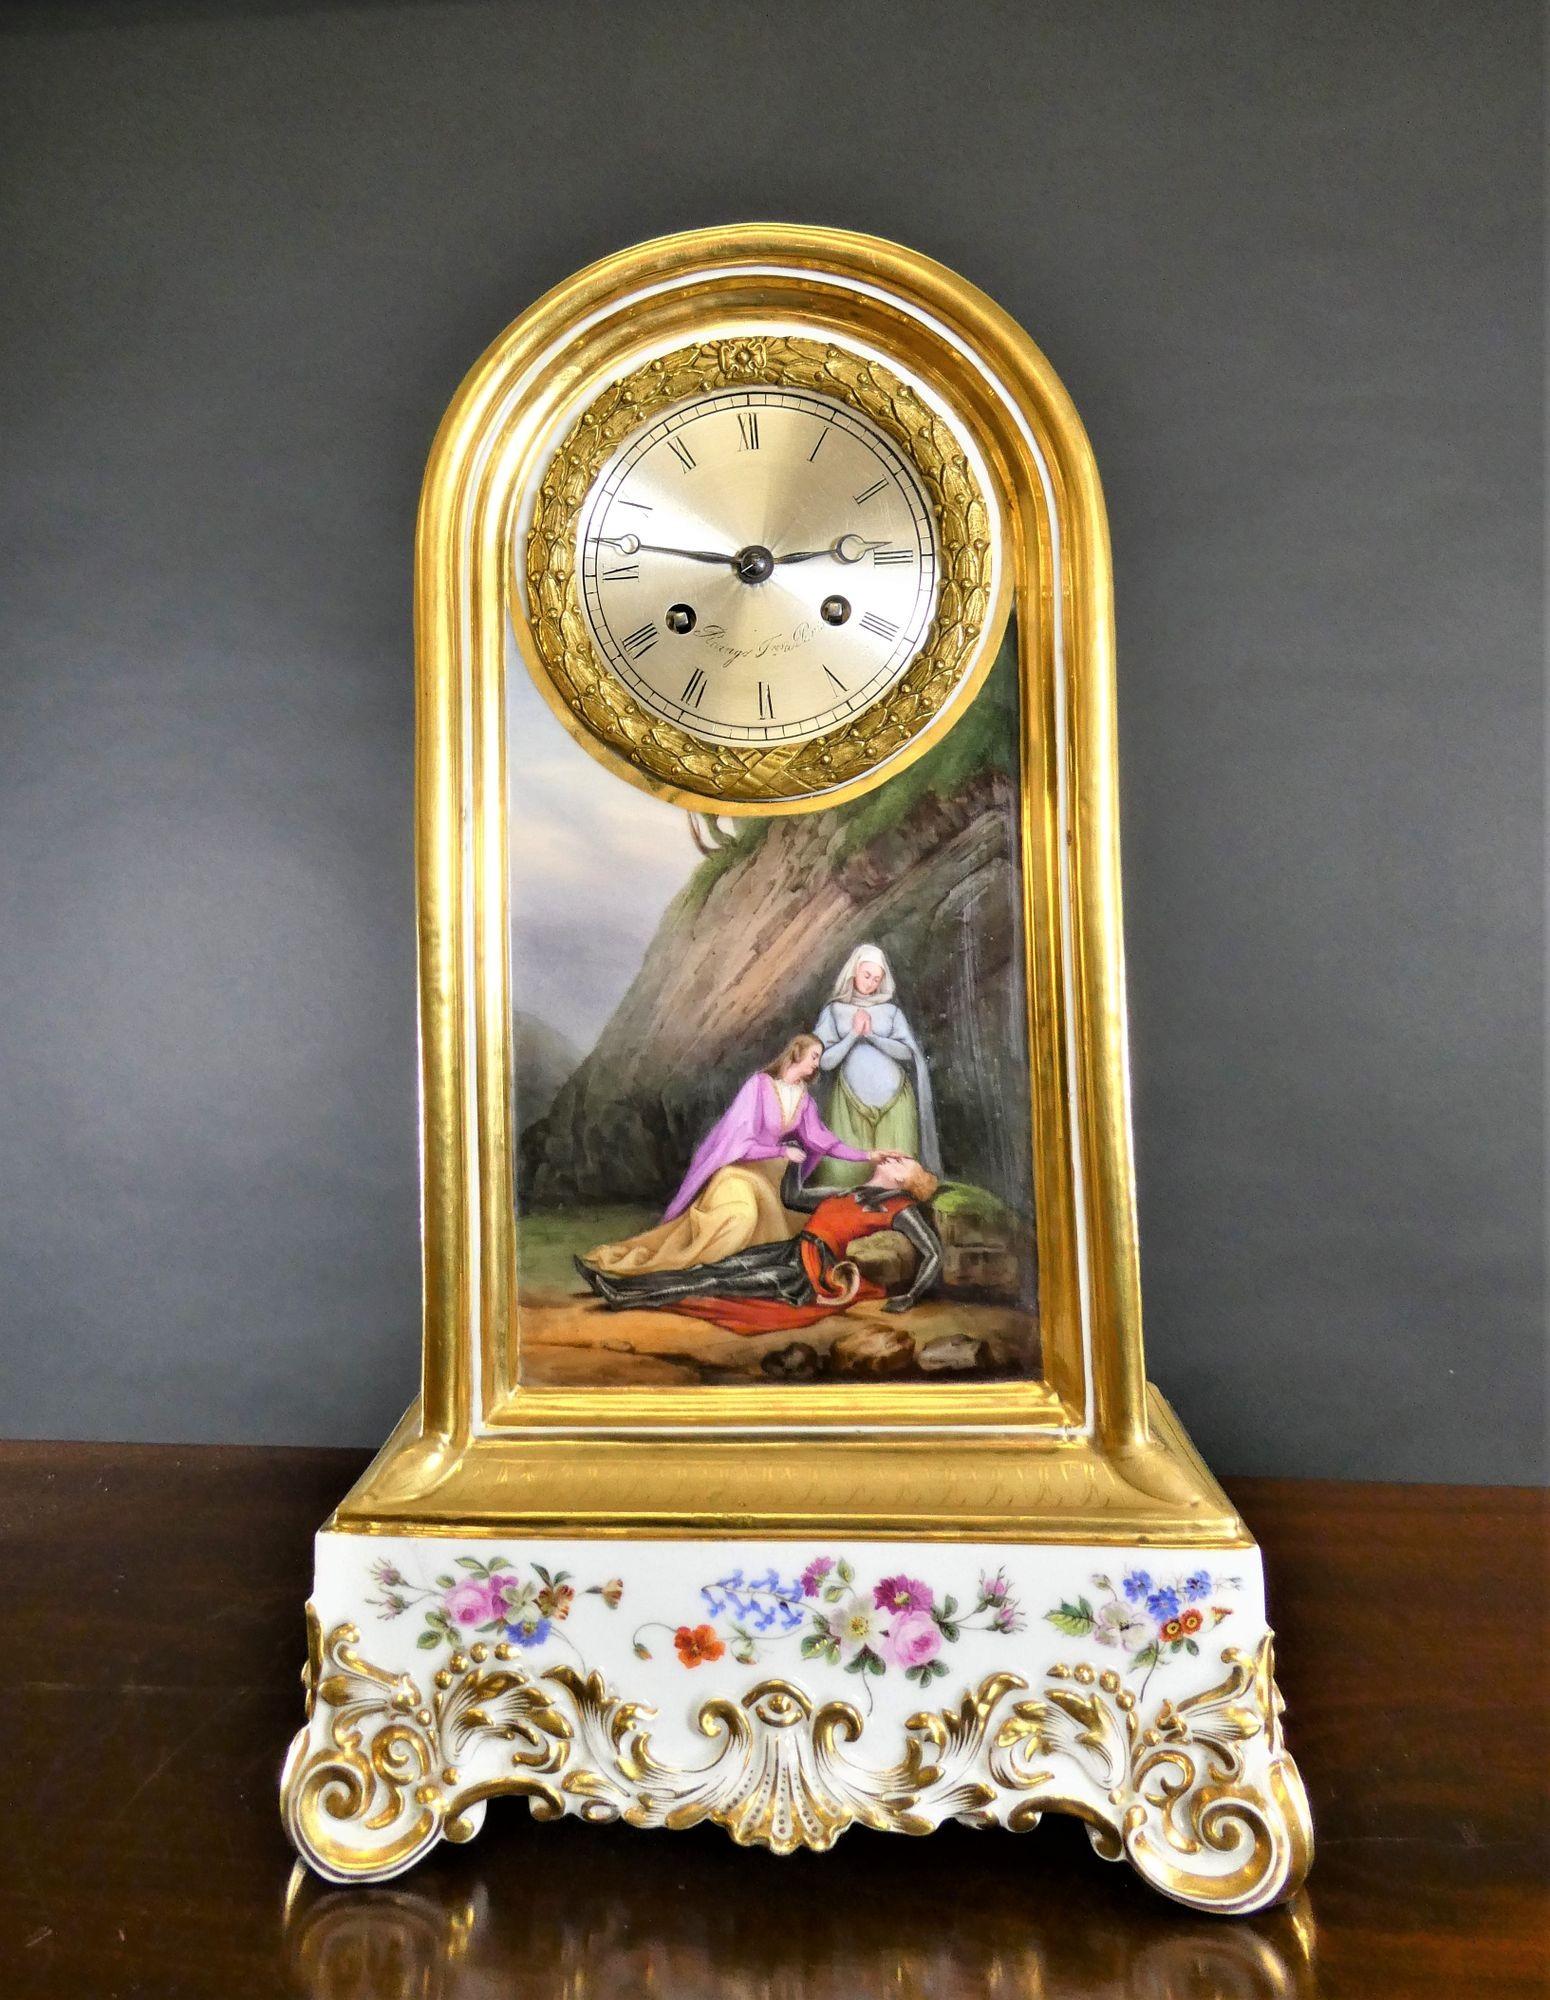 French Porcelain Mantel clock by Raingo Freres, Paris
 
French porcelain mantel clock housed in an arch top case with raised stepped plinth and resting on scroll feet. Outstanding hand painted panel to the front with gilt surround depicting two